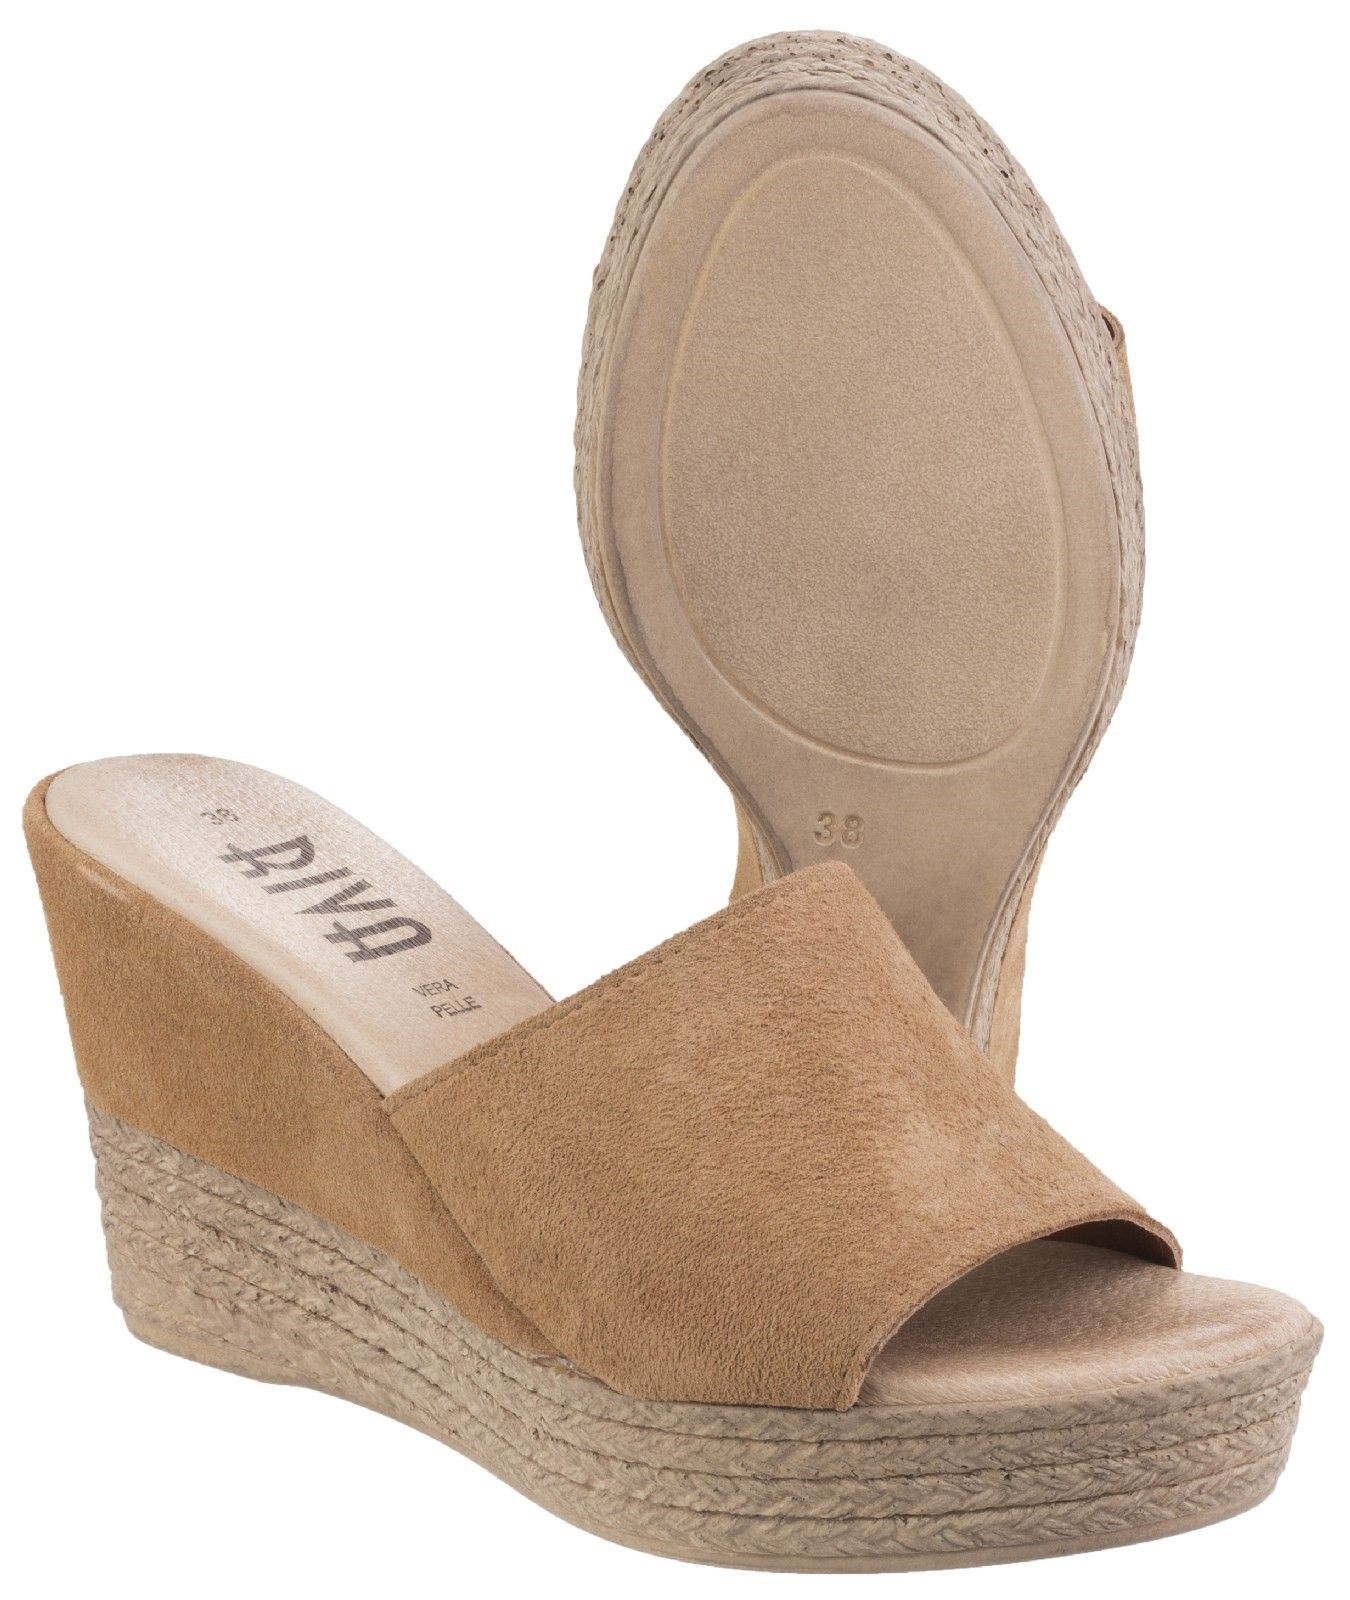 Suede leather Mule with half suede cover wedge and imitation espadrille stitchingSuede leather Mule. 
Half suede cover wedge and imitation espadrille stitching. 
Leather lining.